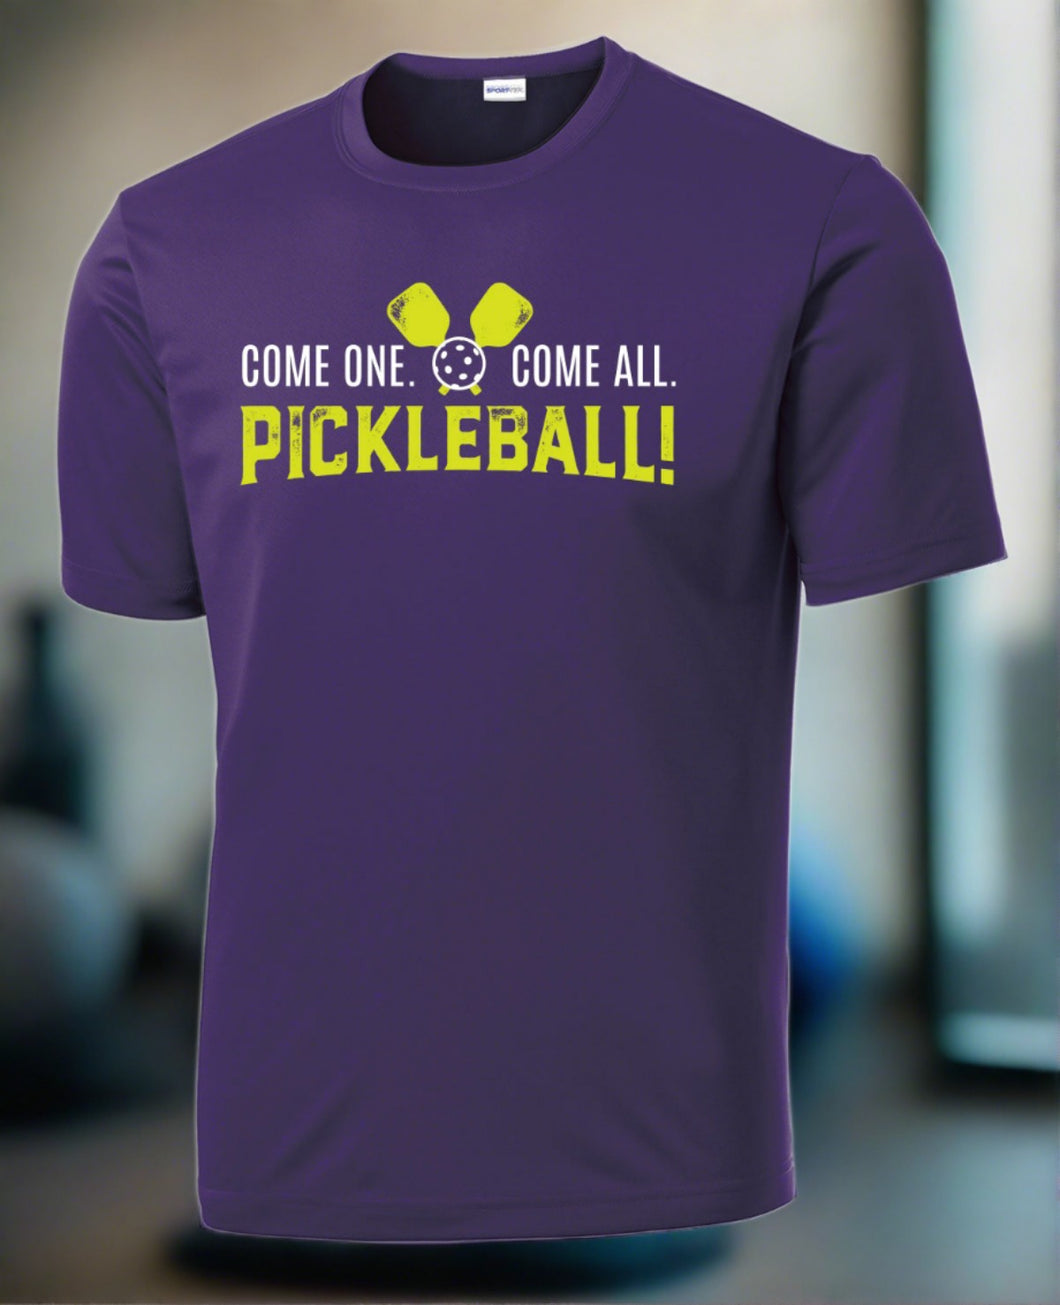 Come One. Come All. Pickleball! - Mens Performance Tee